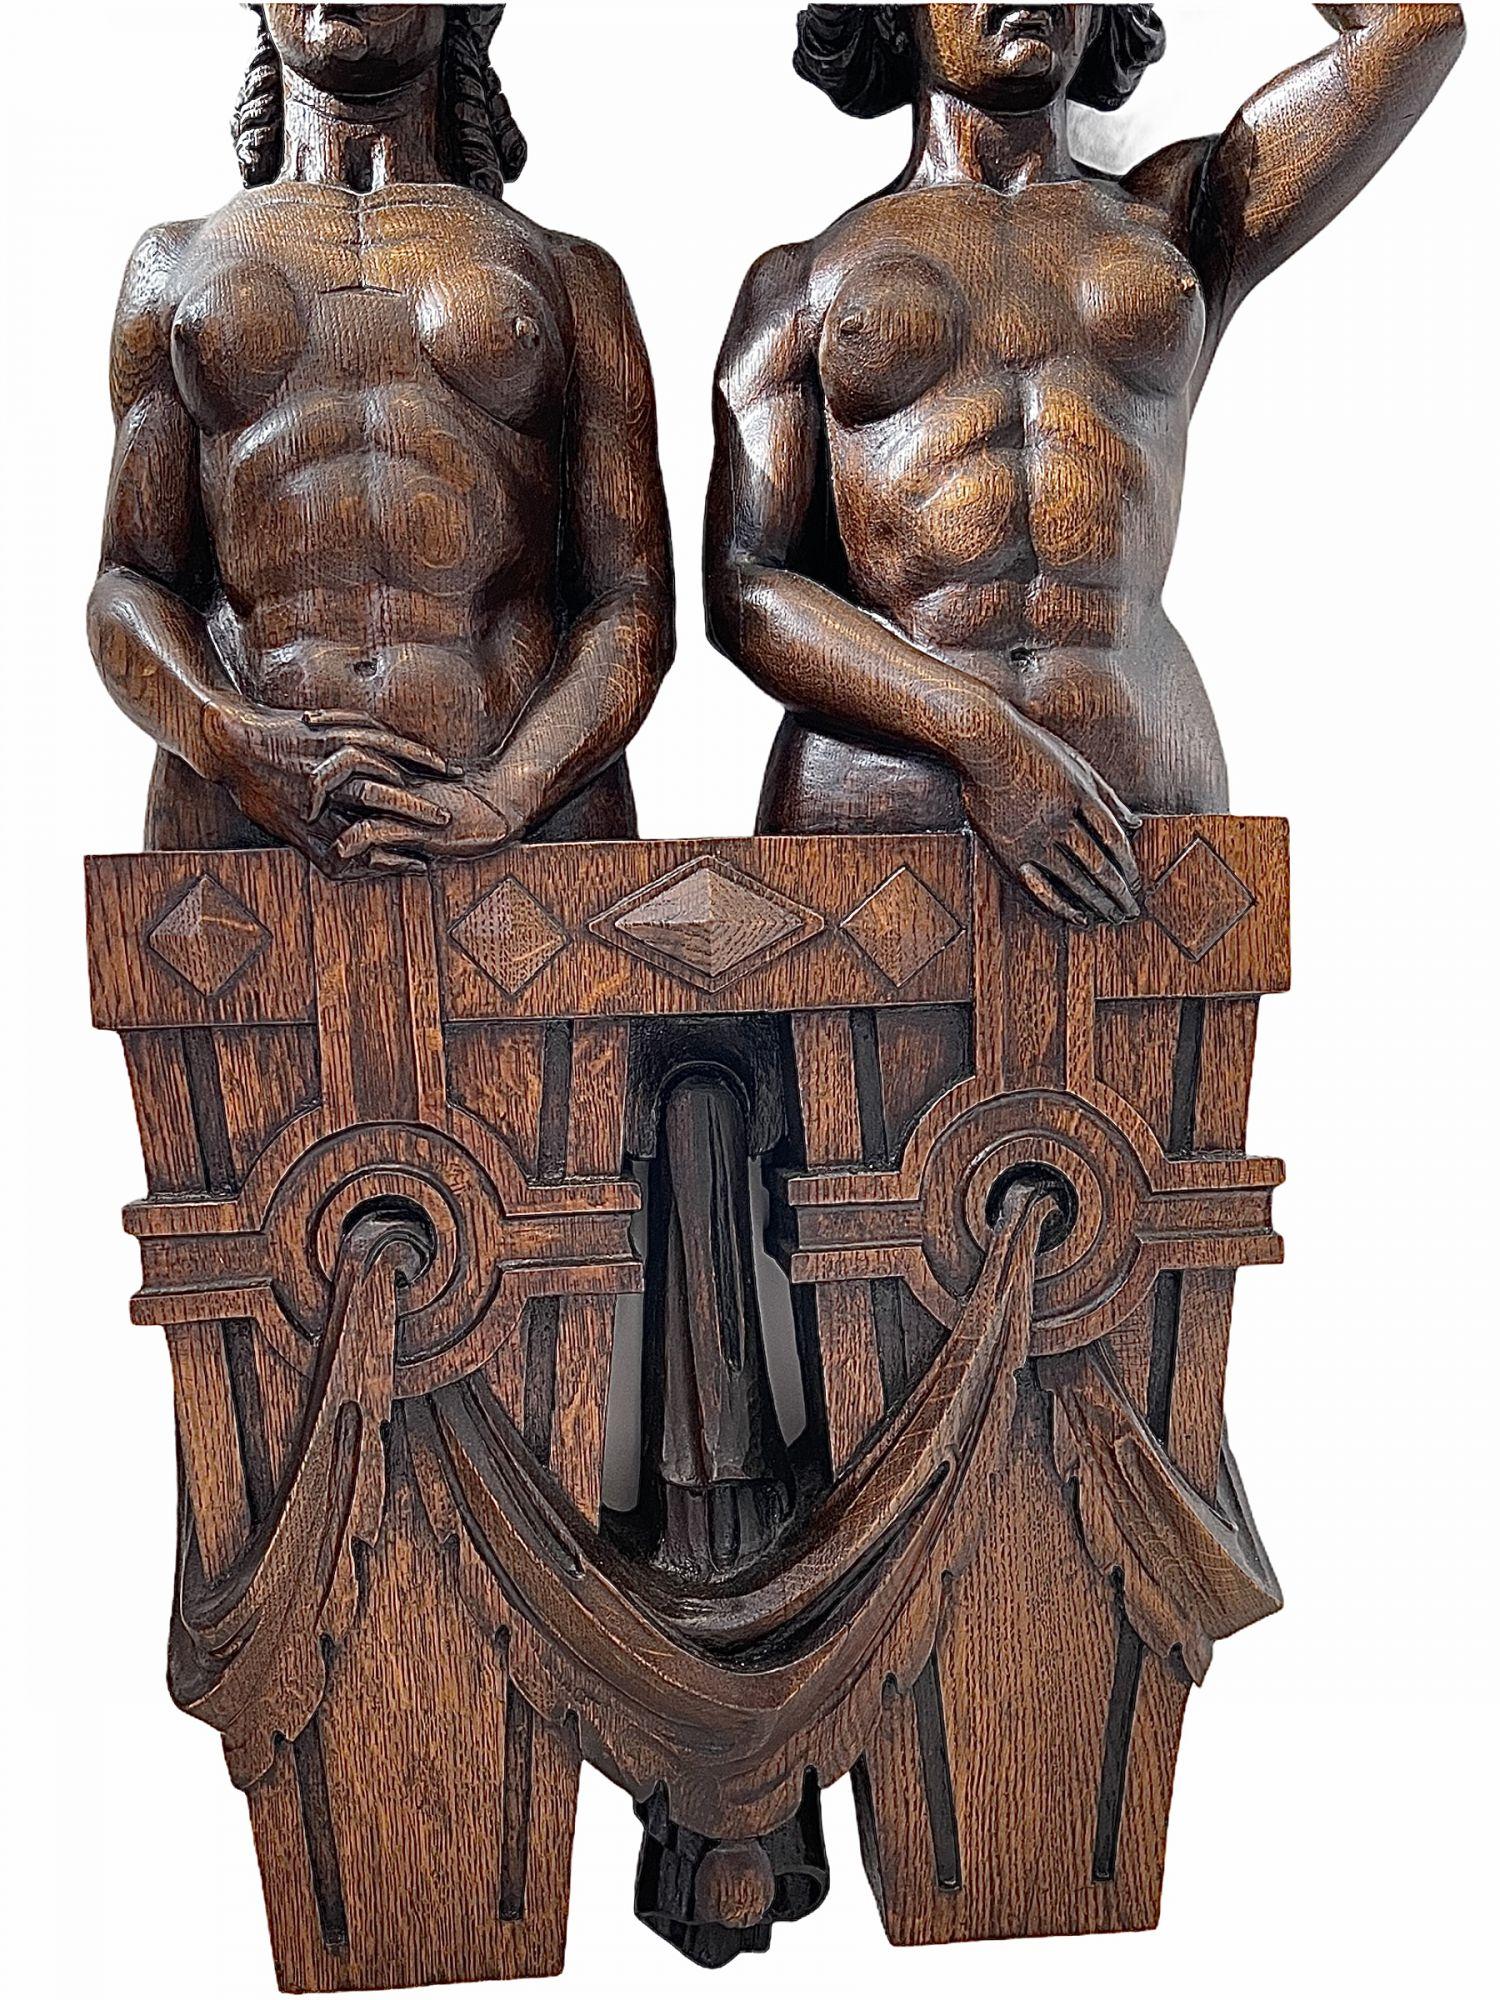 Early 19th Century Pair of German Oak Caryatidal Figures Depicting Historicism In Distressed Condition For Sale In North Miami, FL